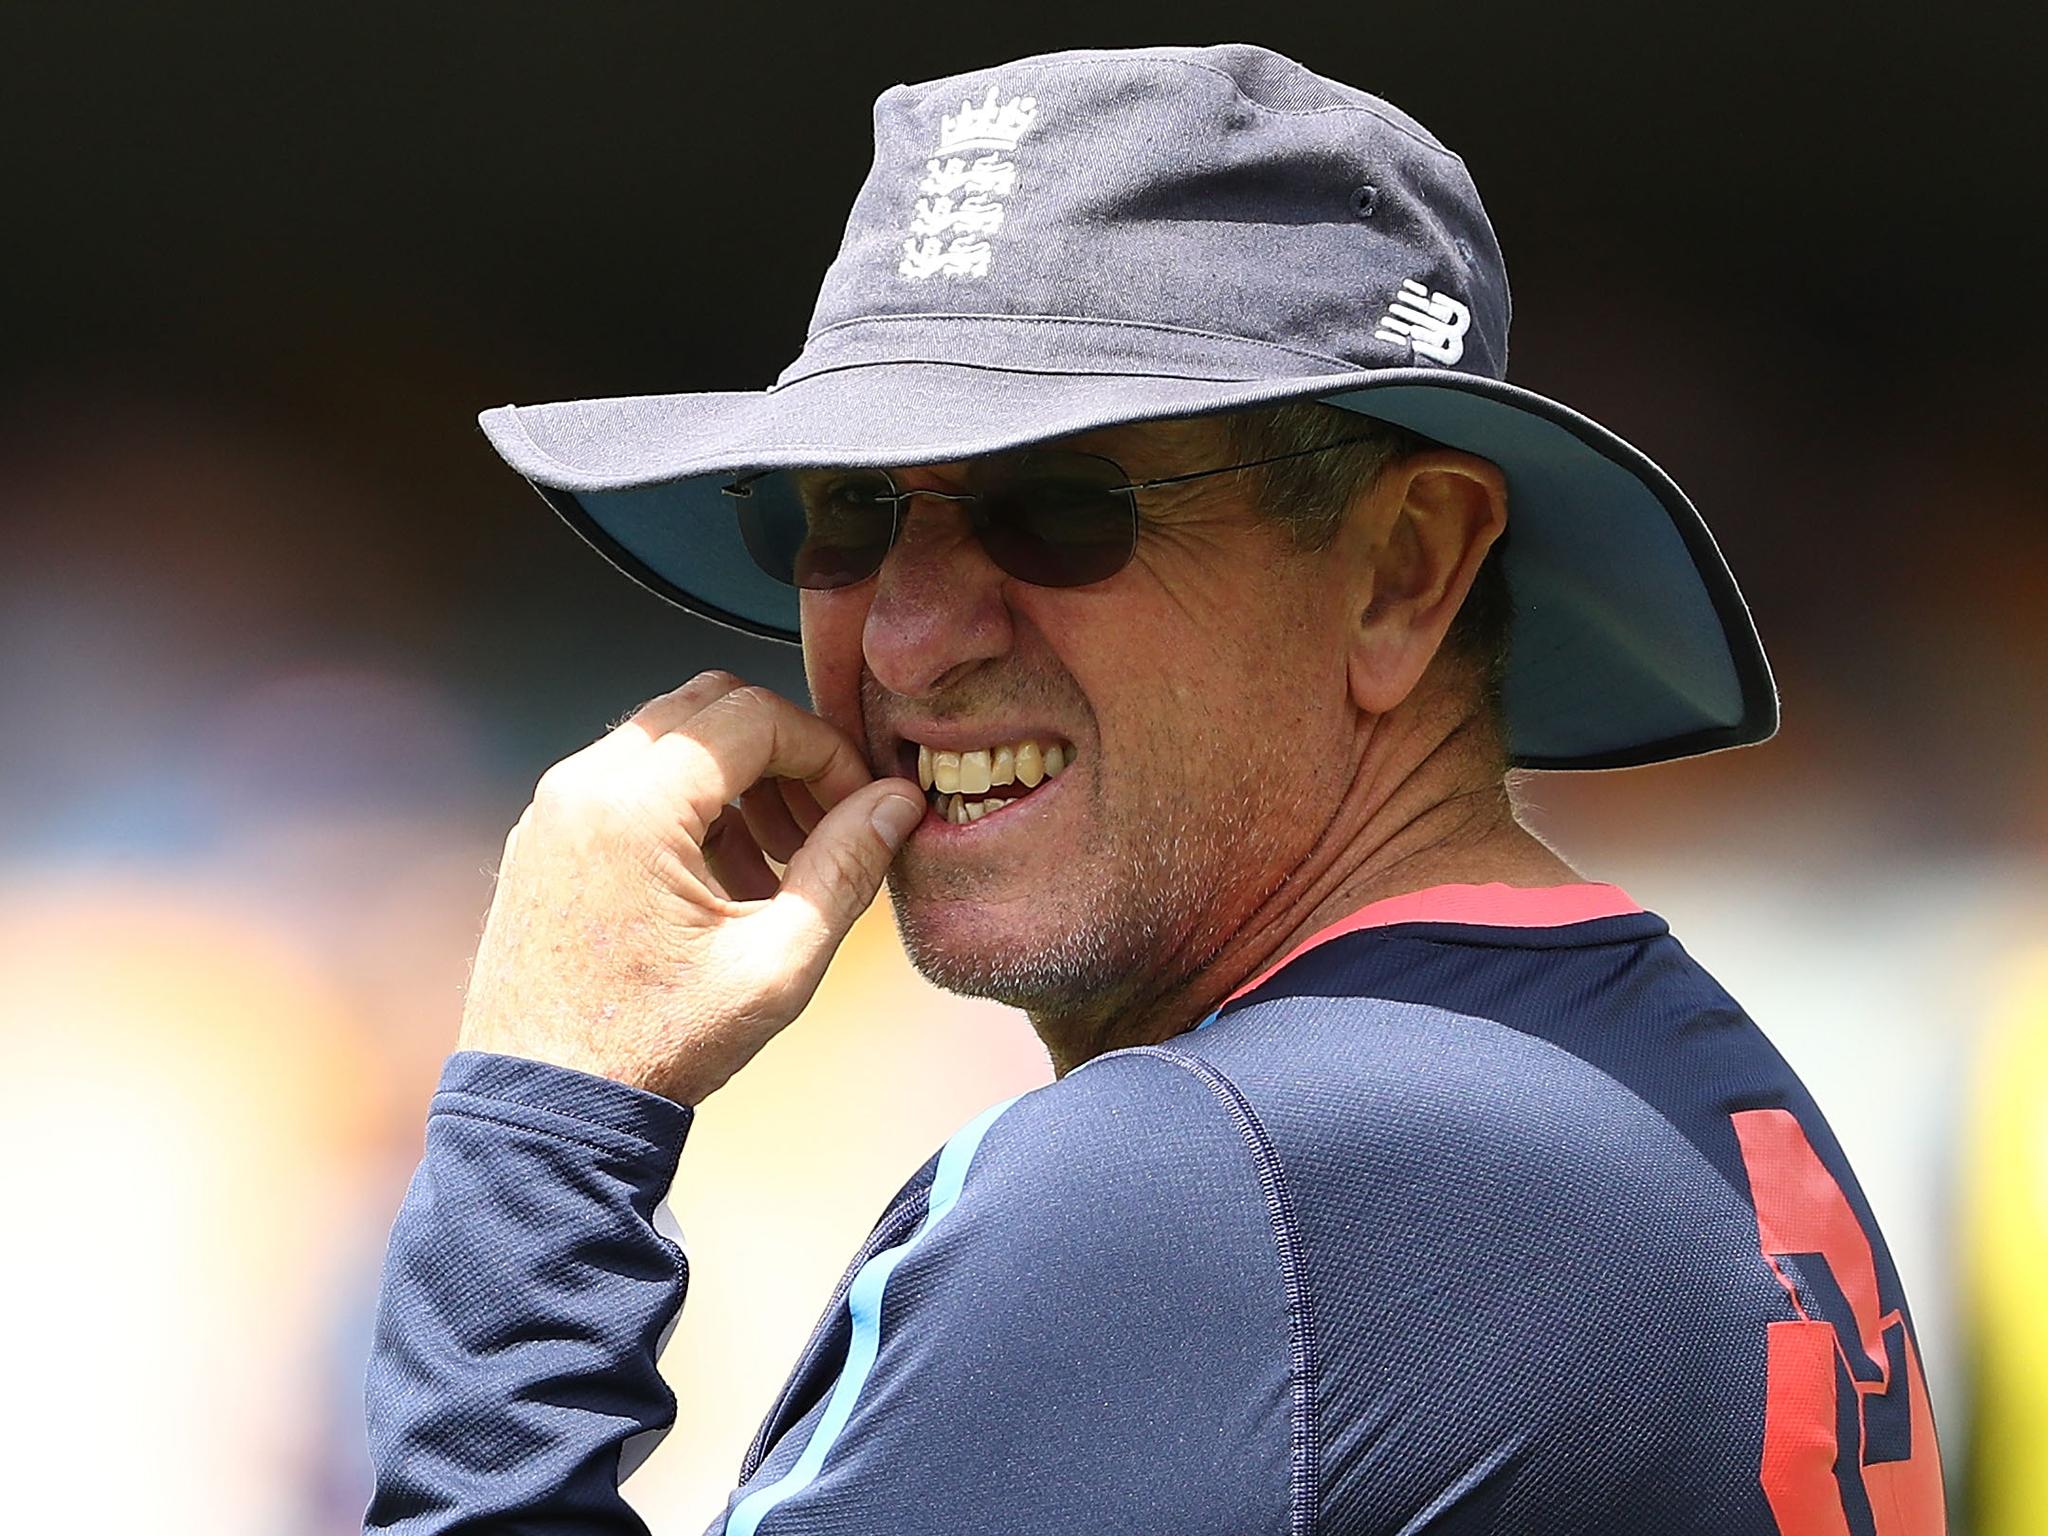 The suspicion remains that England as a Test side may need something that Bayliss is unable to give them